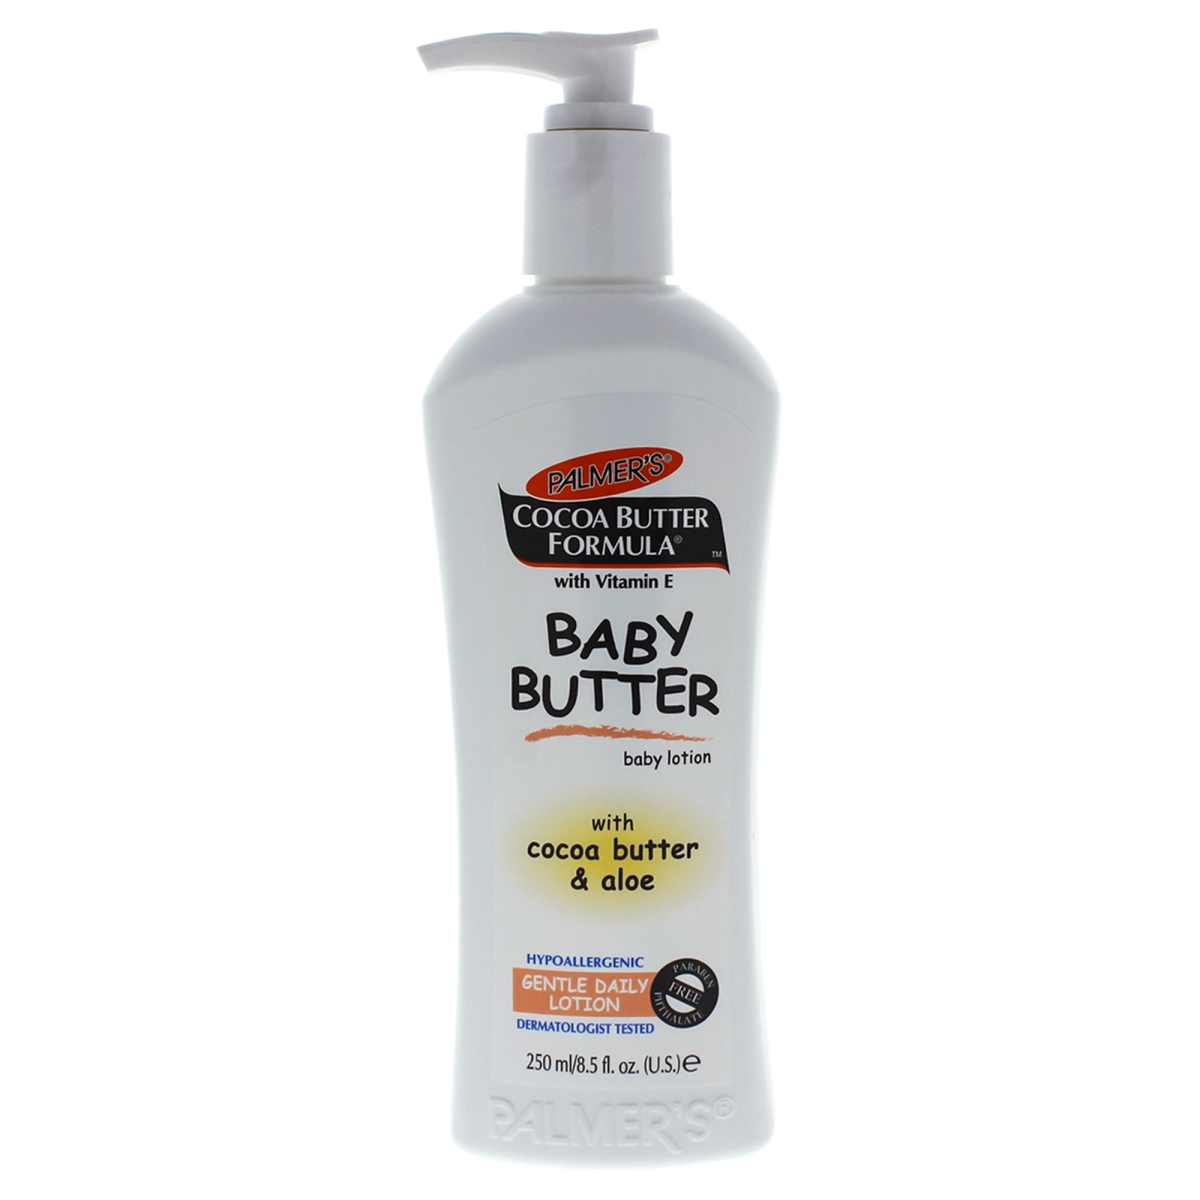 I0088361 Cocoa Butter Baby Butter Body Lotion For Kids - 8.5 Oz